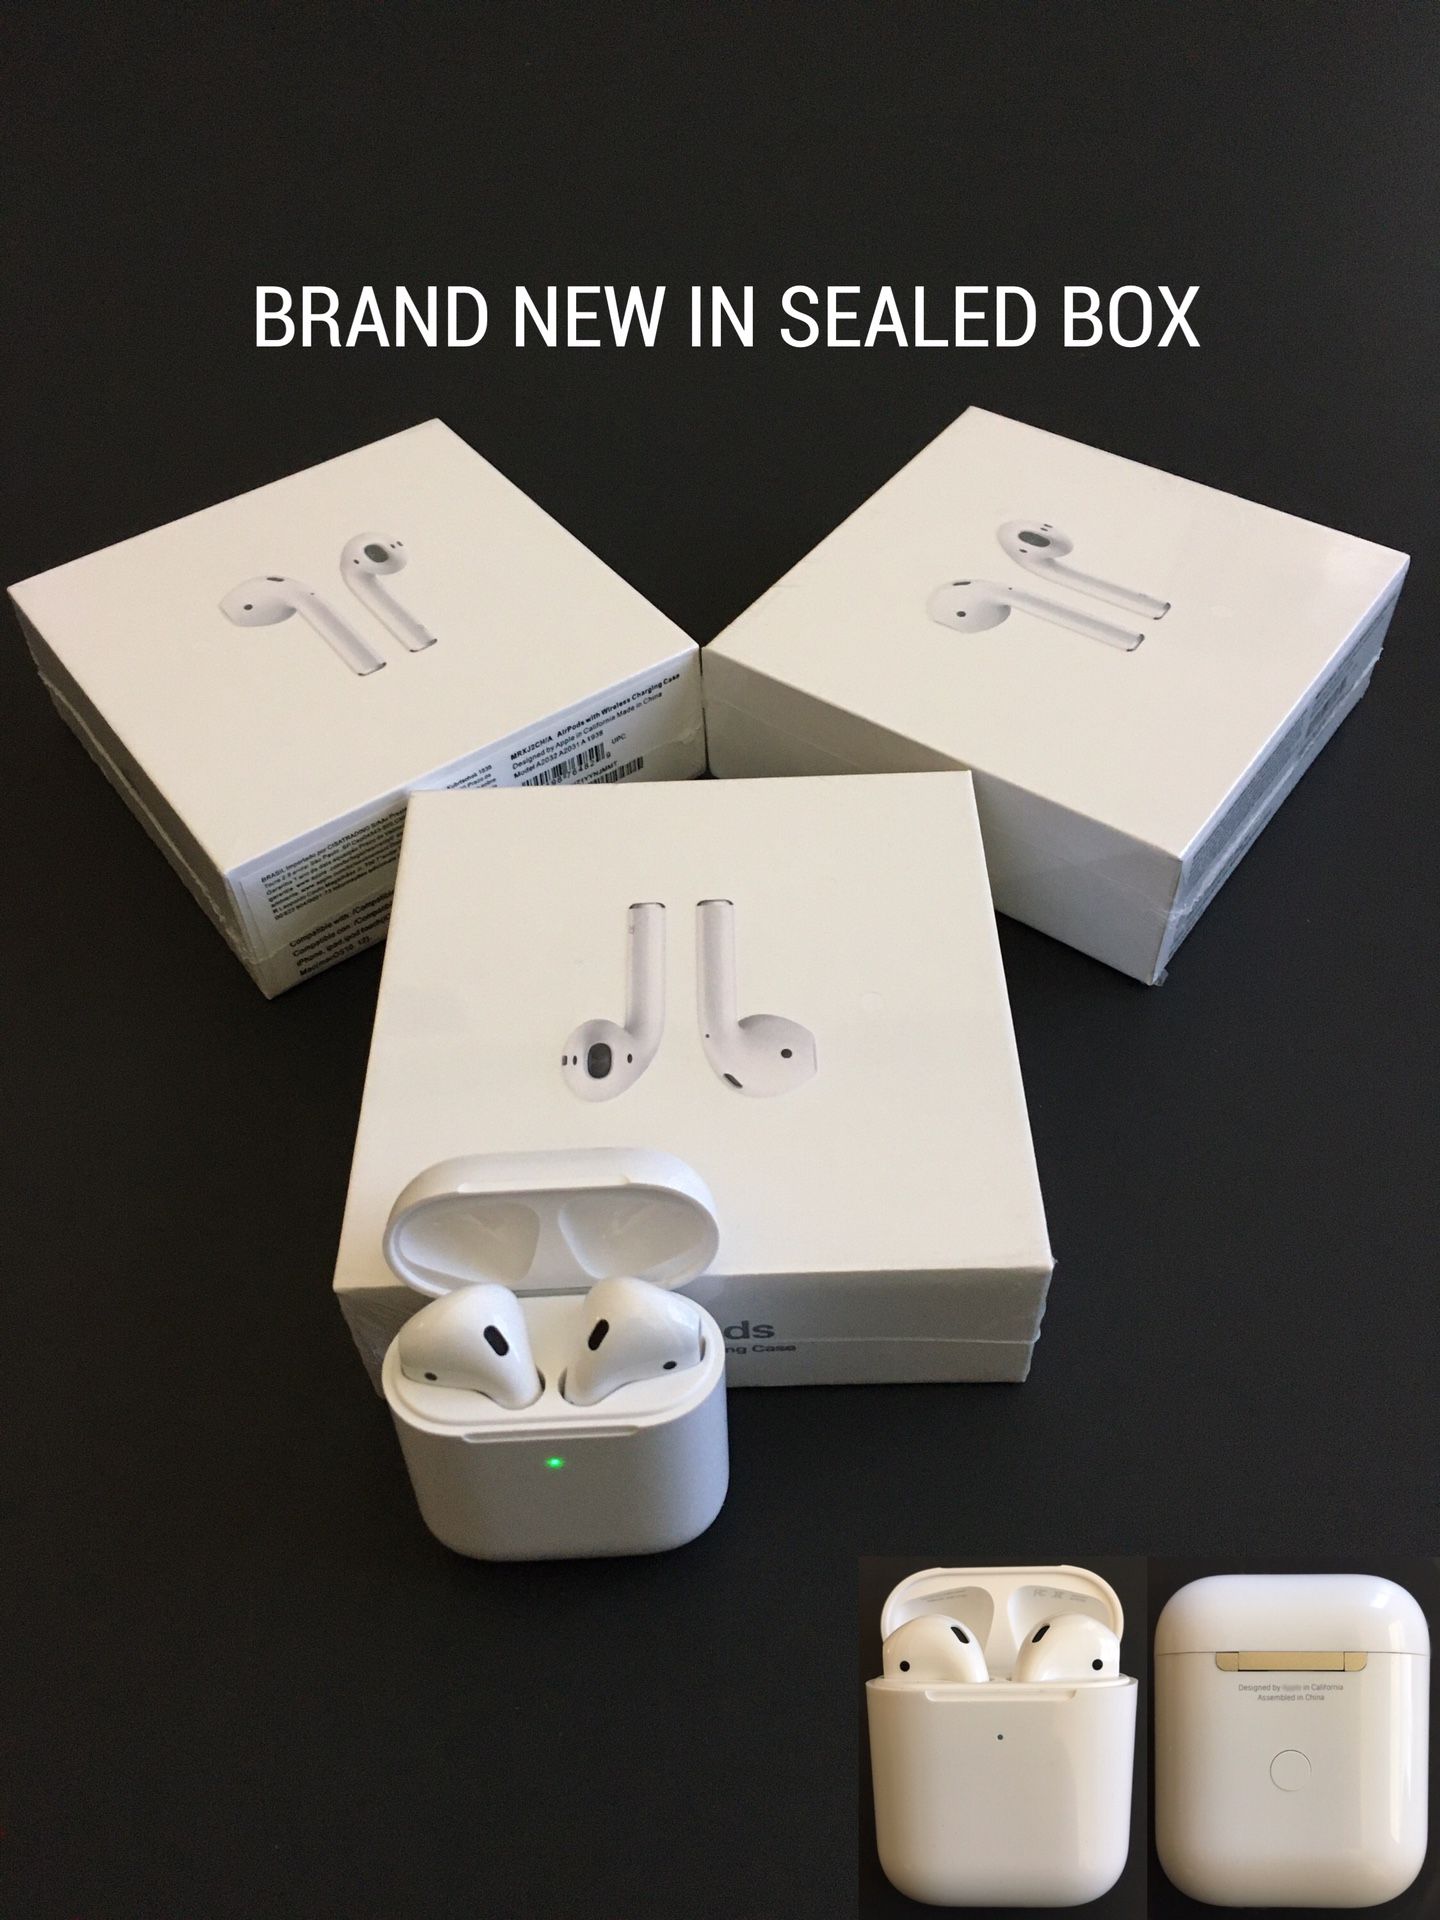 Airpods gen 2 supercopy, earphones, earbuds (BRAND NEW IN SEALED BOX) pop up animation iOS, smart sensor, rename & gps location, 3 real 🔋%, iPH/ANDR